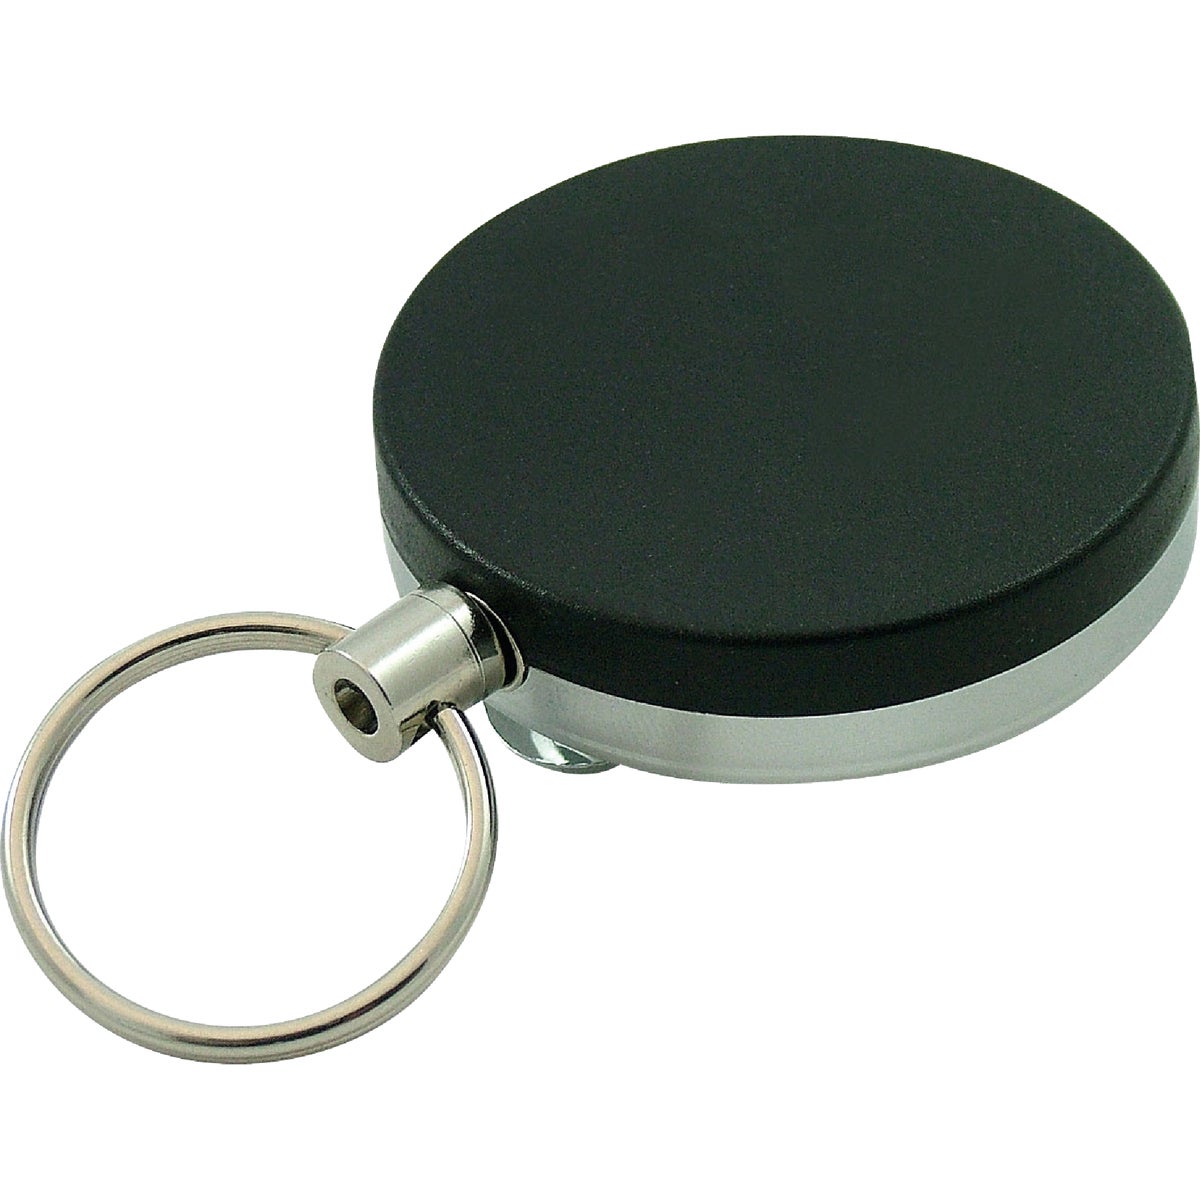 Item 584037, Durable retractable key chain that clips onto belt.